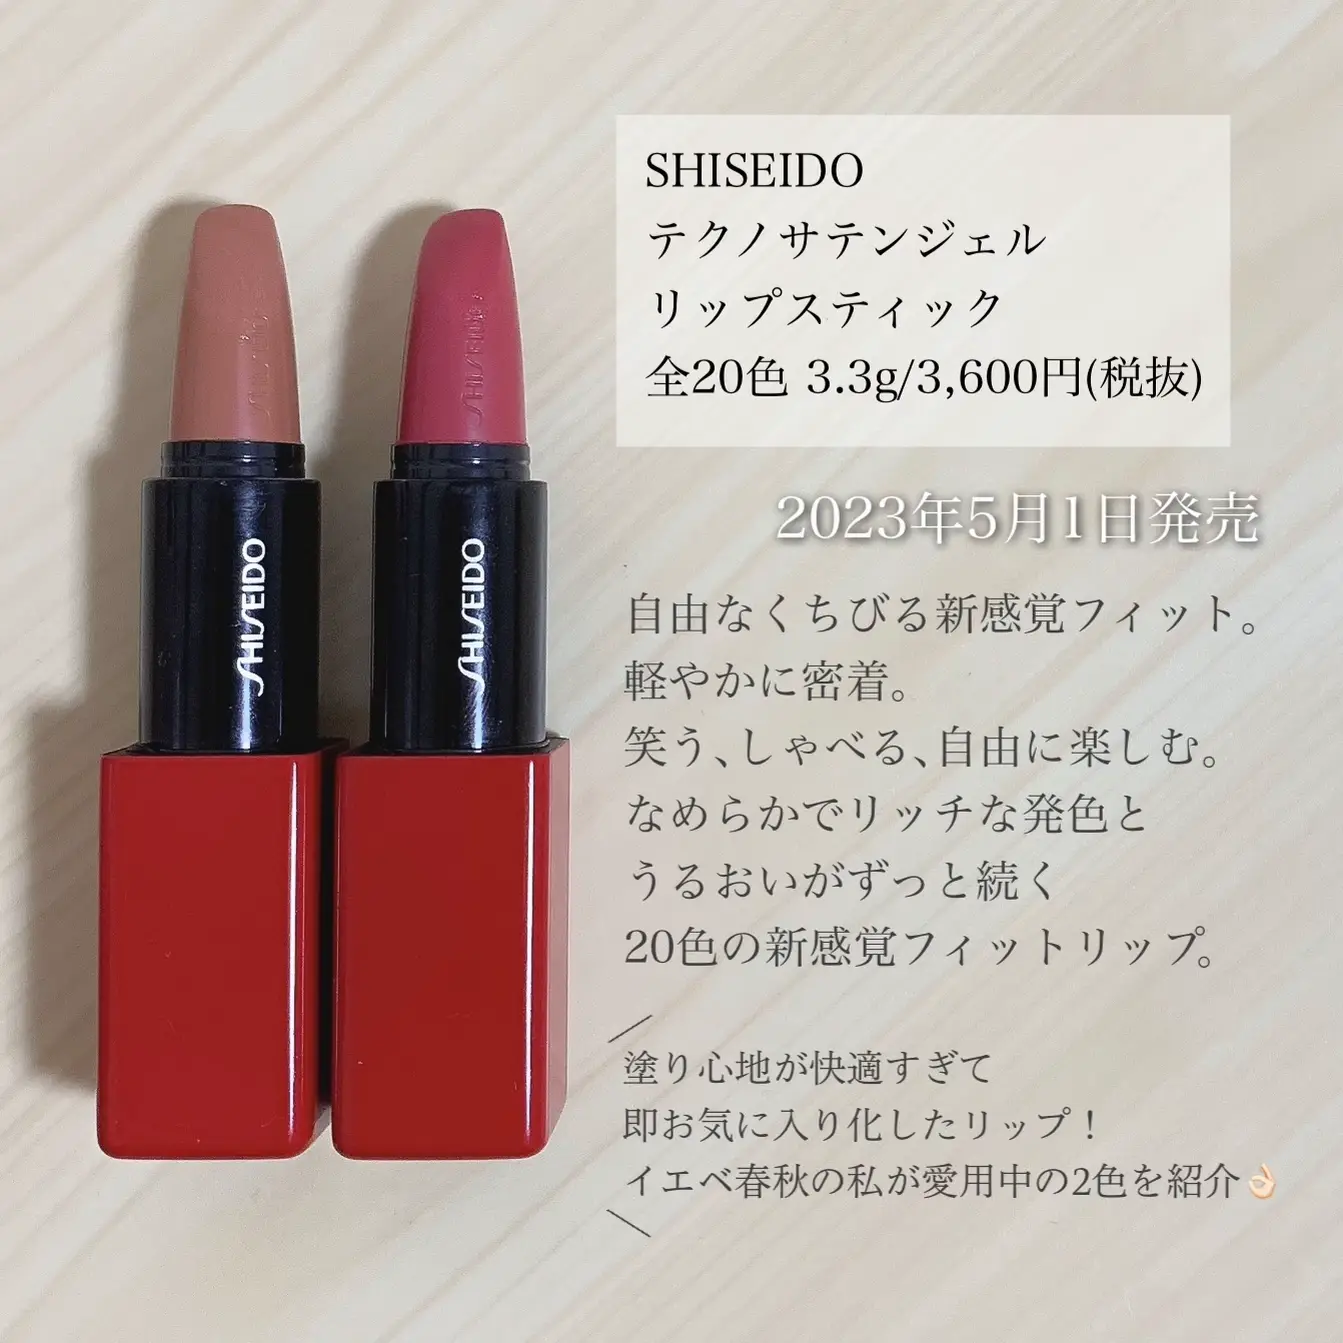 SHISEIDO] 2023 Myvescos! Smooth texture lip that fits any expression💄 |  Gallery posted by ﾔﾏｼﾀ | Lemon8